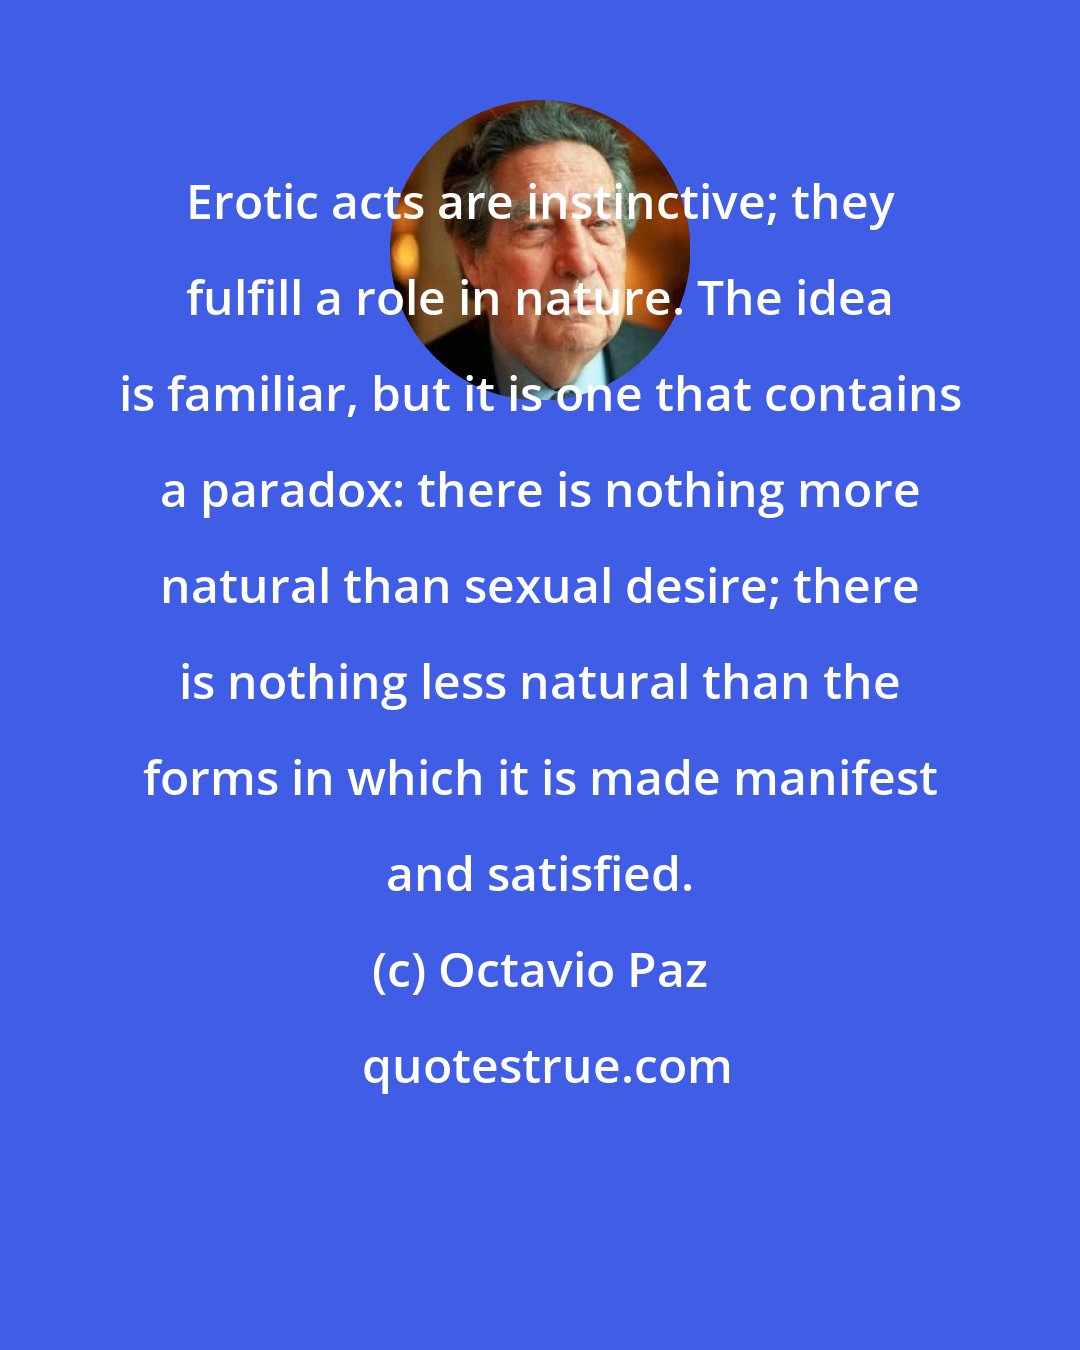 Octavio Paz: Erotic acts are instinctive; they fulfill a role in nature. The idea is familiar, but it is one that contains a paradox: there is nothing more natural than sexual desire; there is nothing less natural than the forms in which it is made manifest and satisfied.